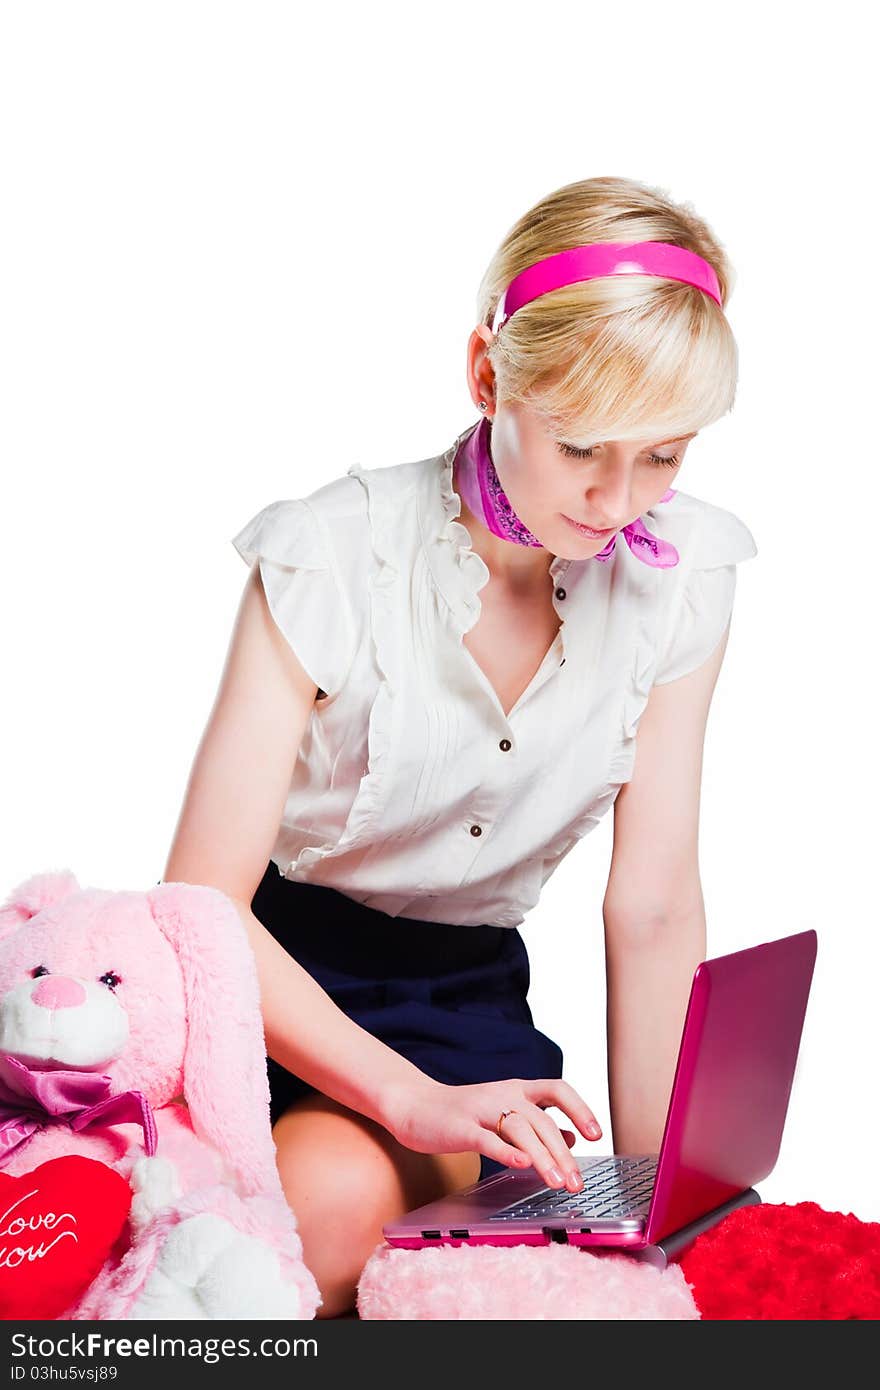 Portrait of beautiful blond girl wearing short skirt and white shoes near pink rabbit working with pink laptop on isolated white background. Portrait of beautiful blond girl wearing short skirt and white shoes near pink rabbit working with pink laptop on isolated white background